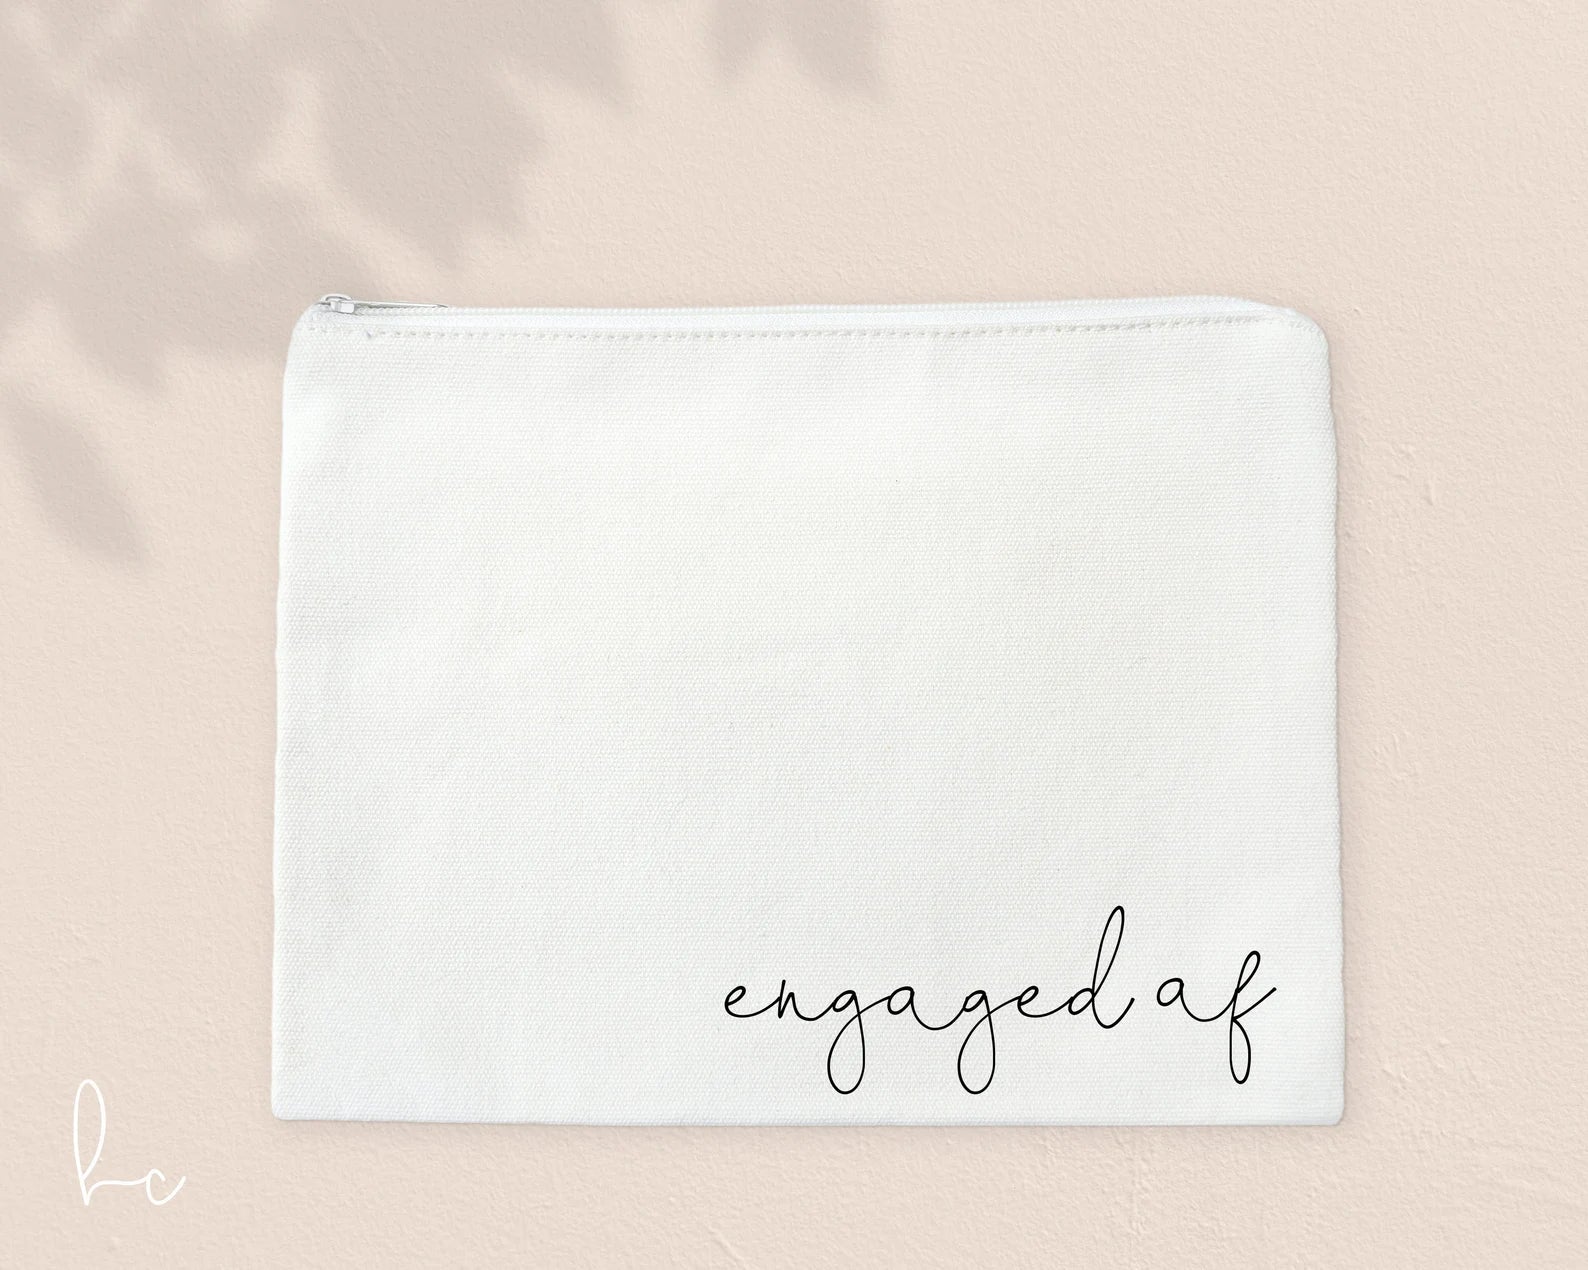 Engaged af gifts Bride makeup bag- personalized tote bag- bride make up pouch- engagement gift idea - gift for future Mrs bride to be wifey